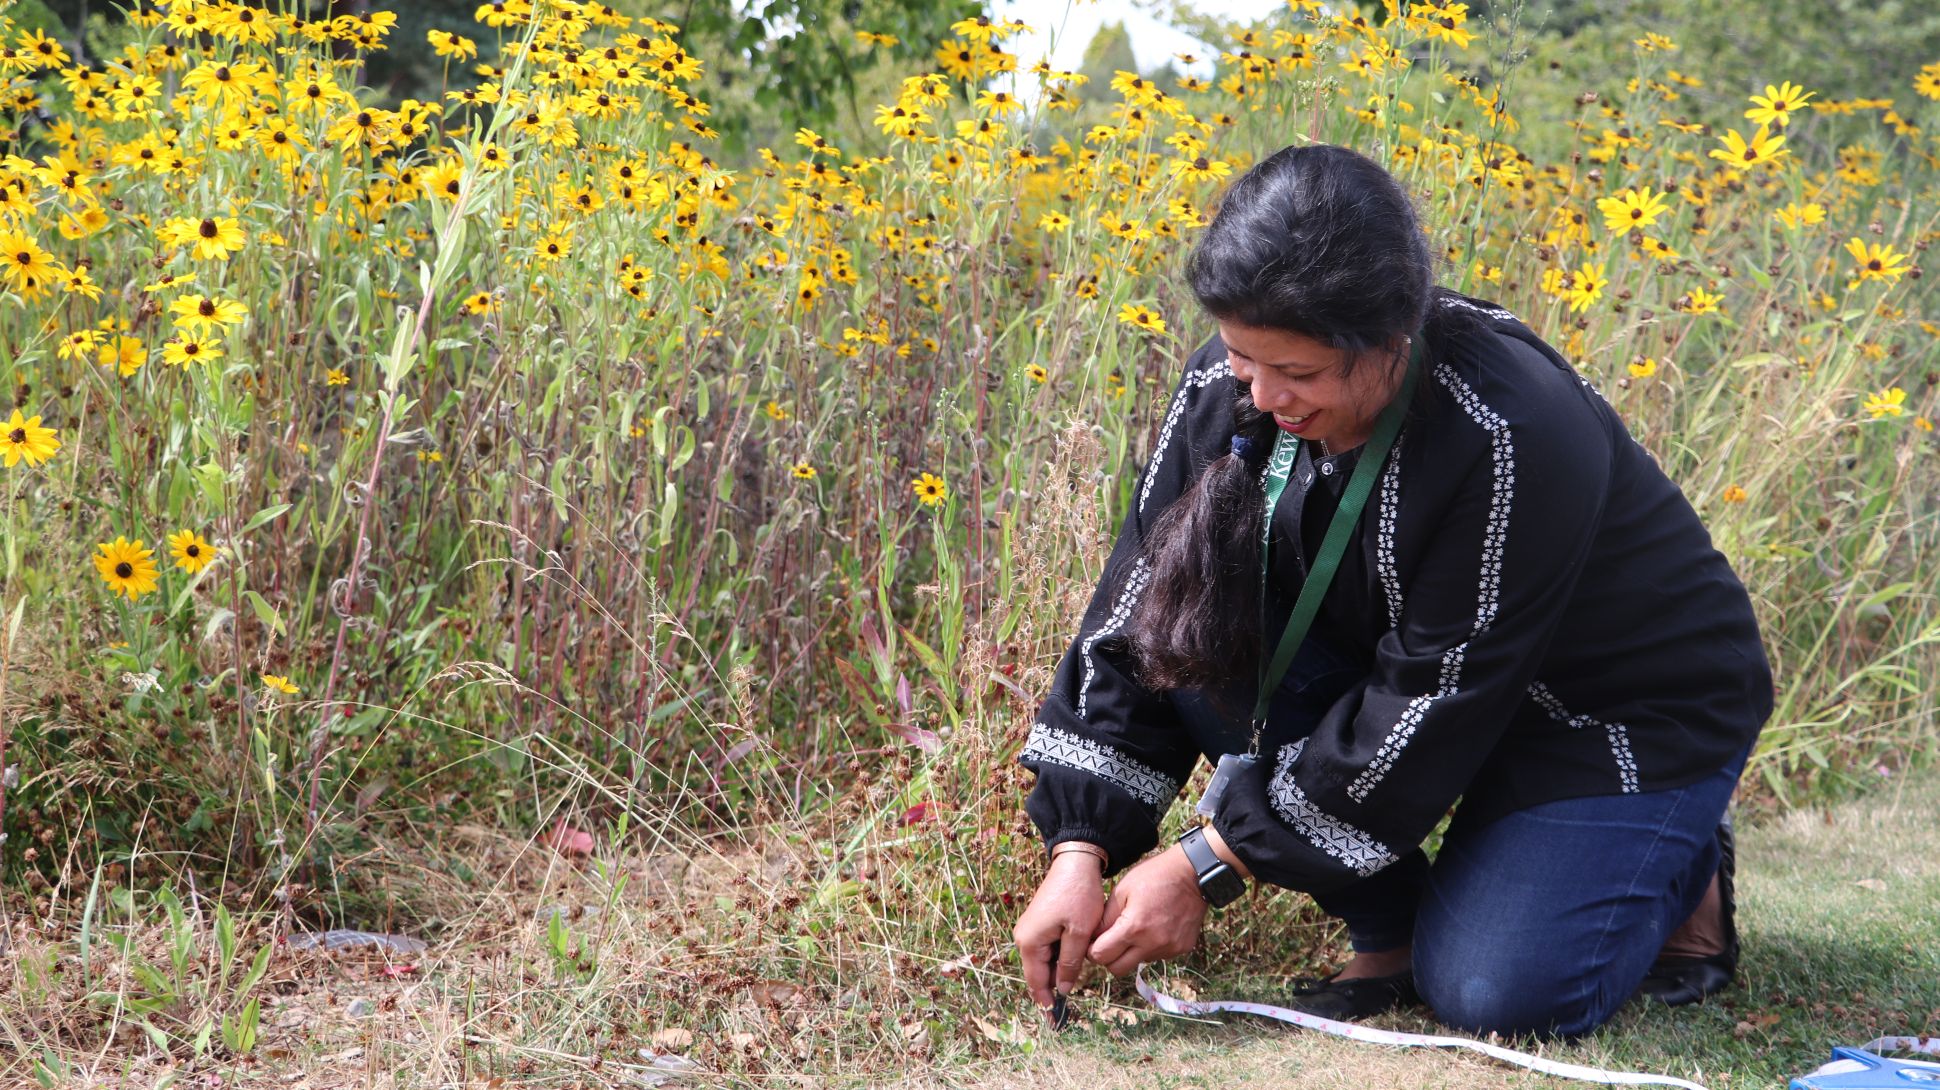 A woman uses a measuring tape on the floor next to tall wildflowers